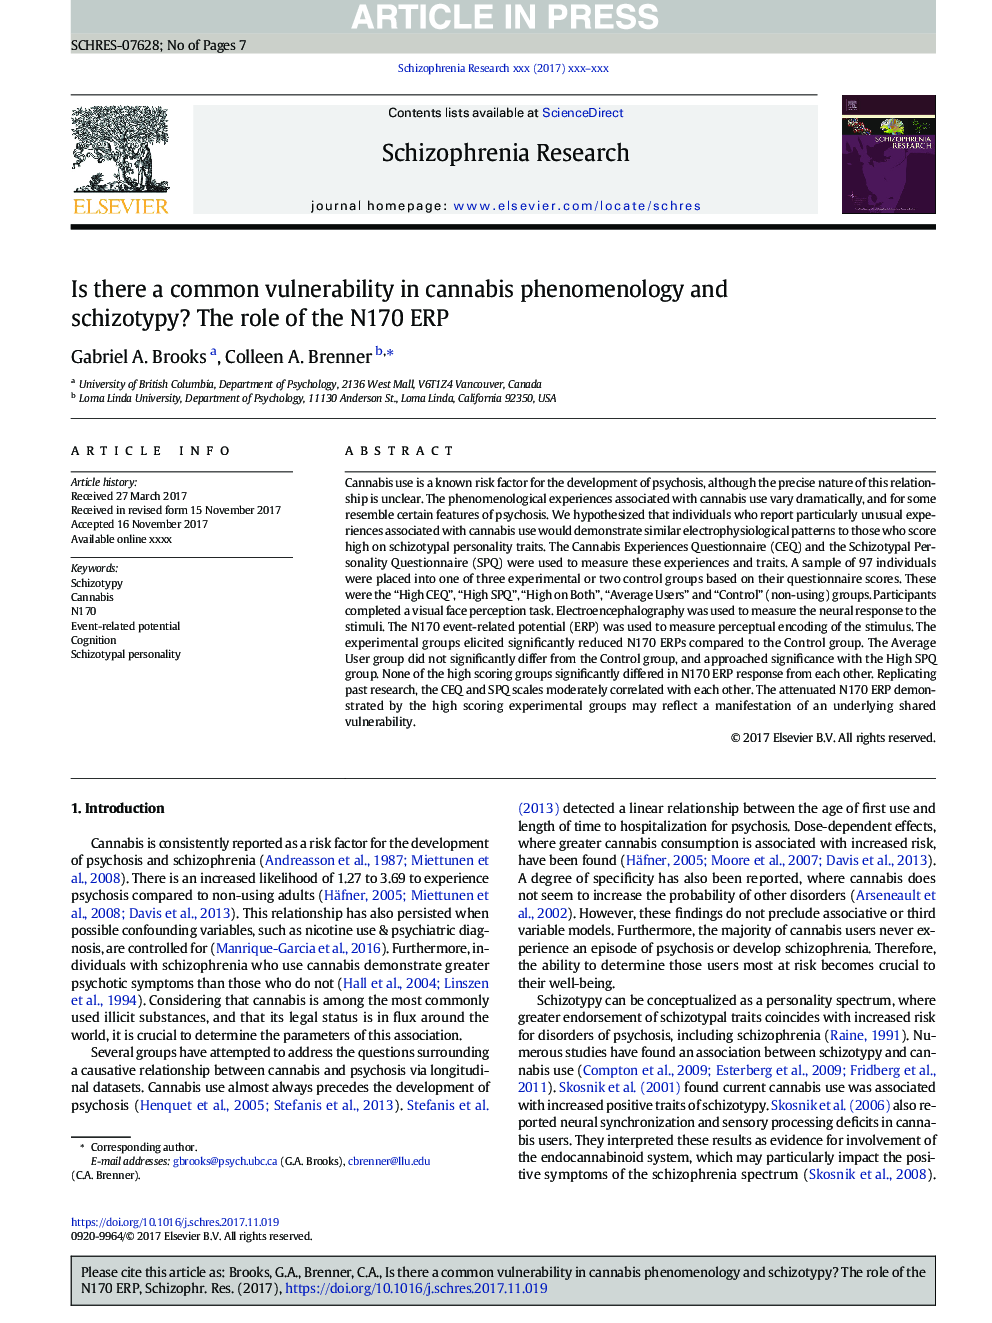 Is there a common vulnerability in cannabis phenomenology and schizotypy? The role of the N170 ERP